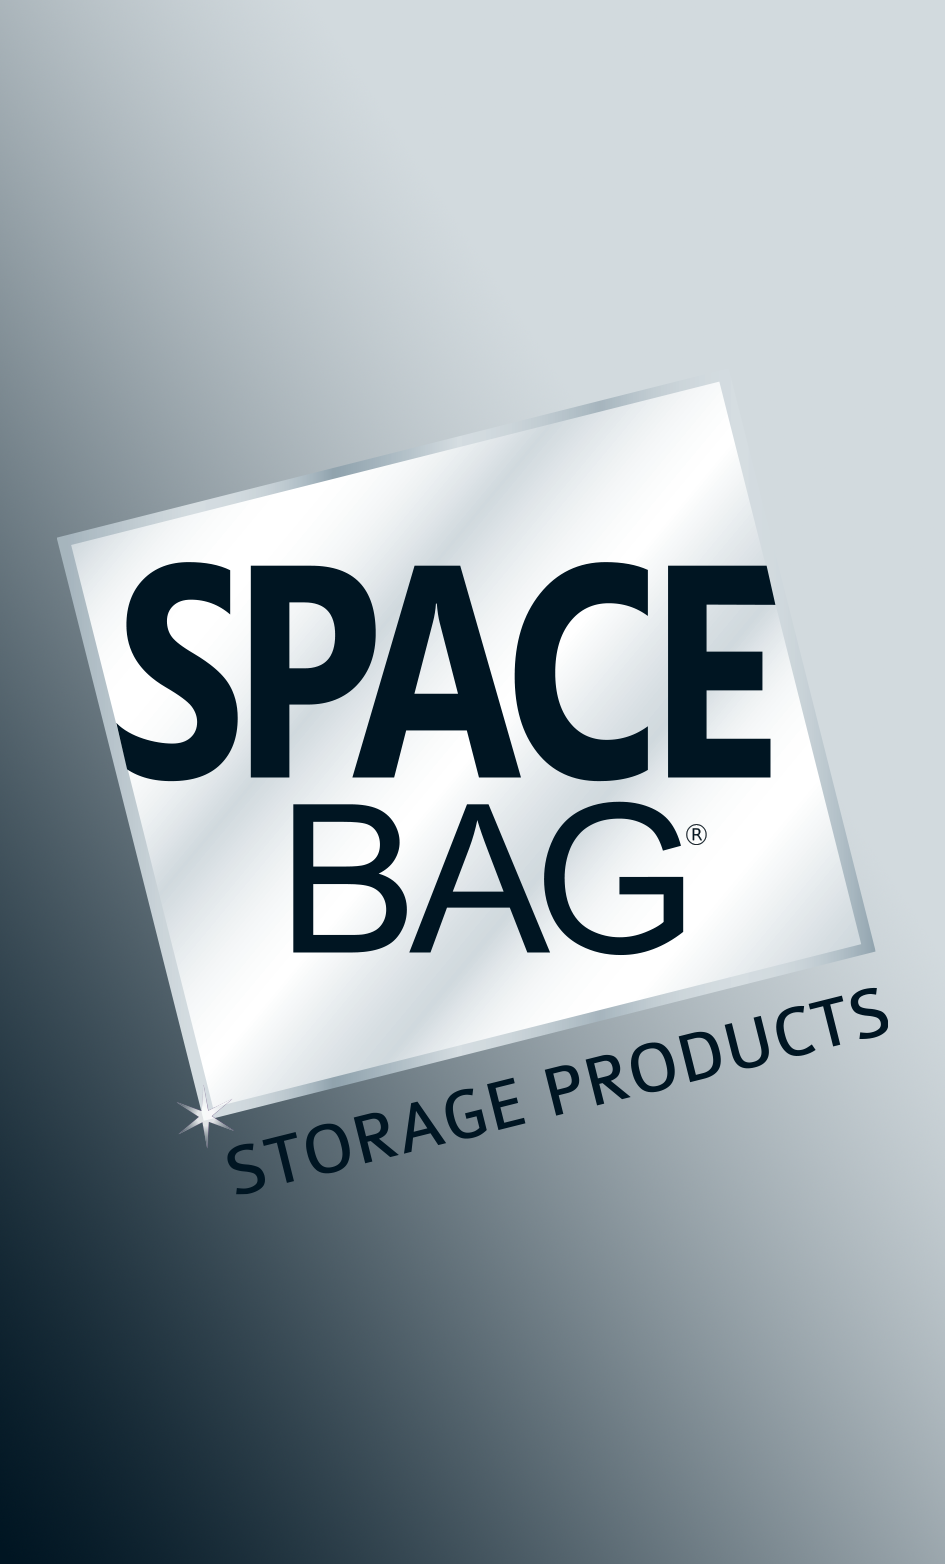 Developing an Online Community for Space Bag Case Study